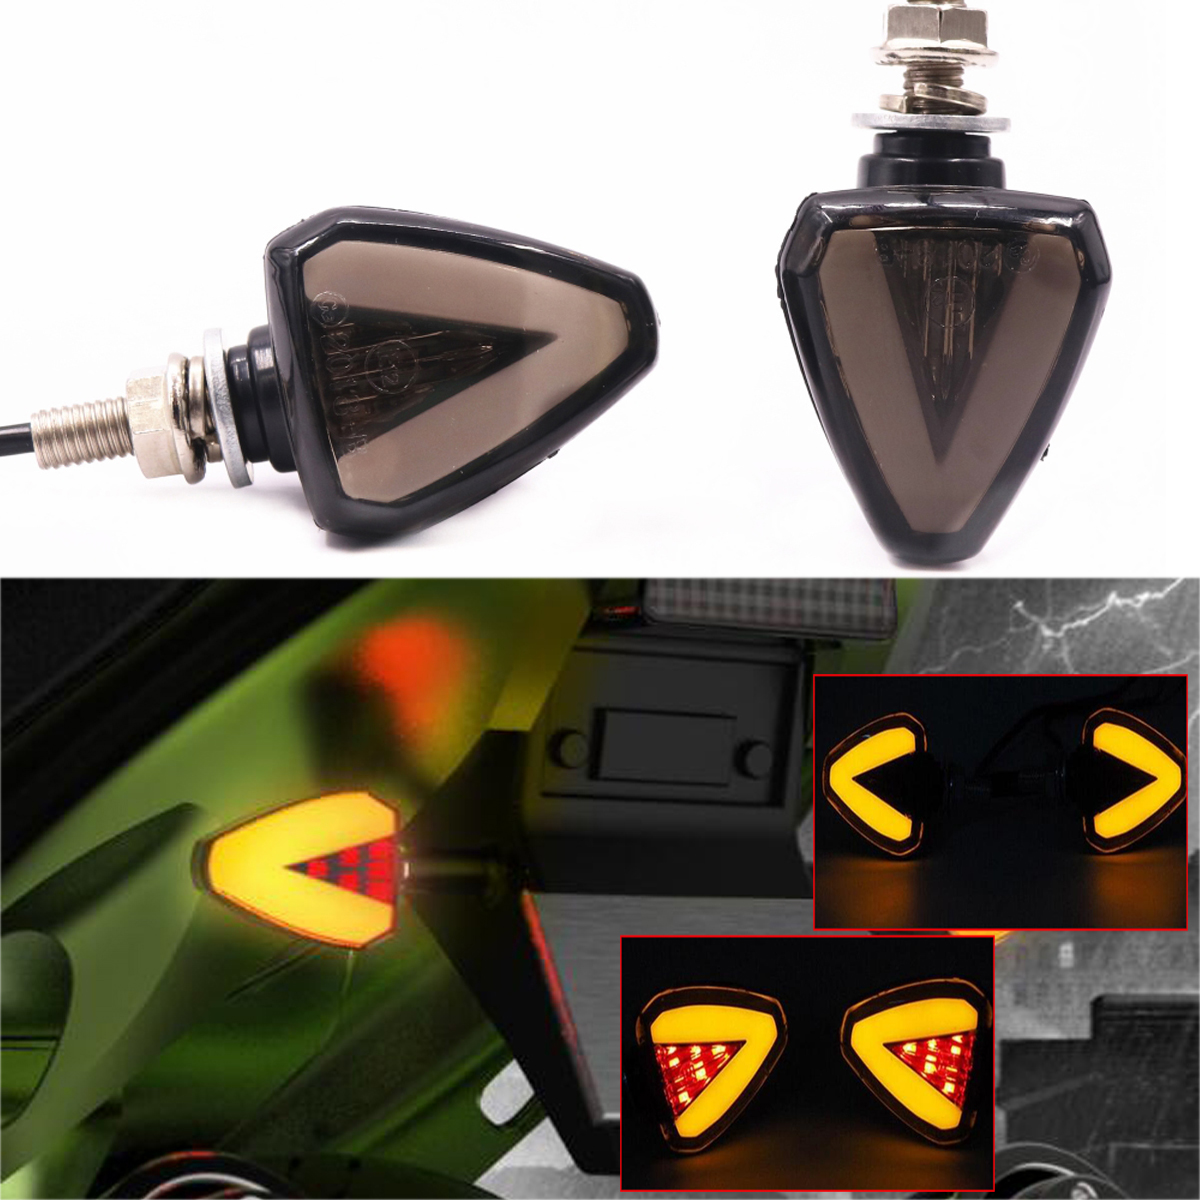 12V Motorcycle LED Turn Signal Brake Lights Scooter ATV Taillight Yellow+Red E11 Mark